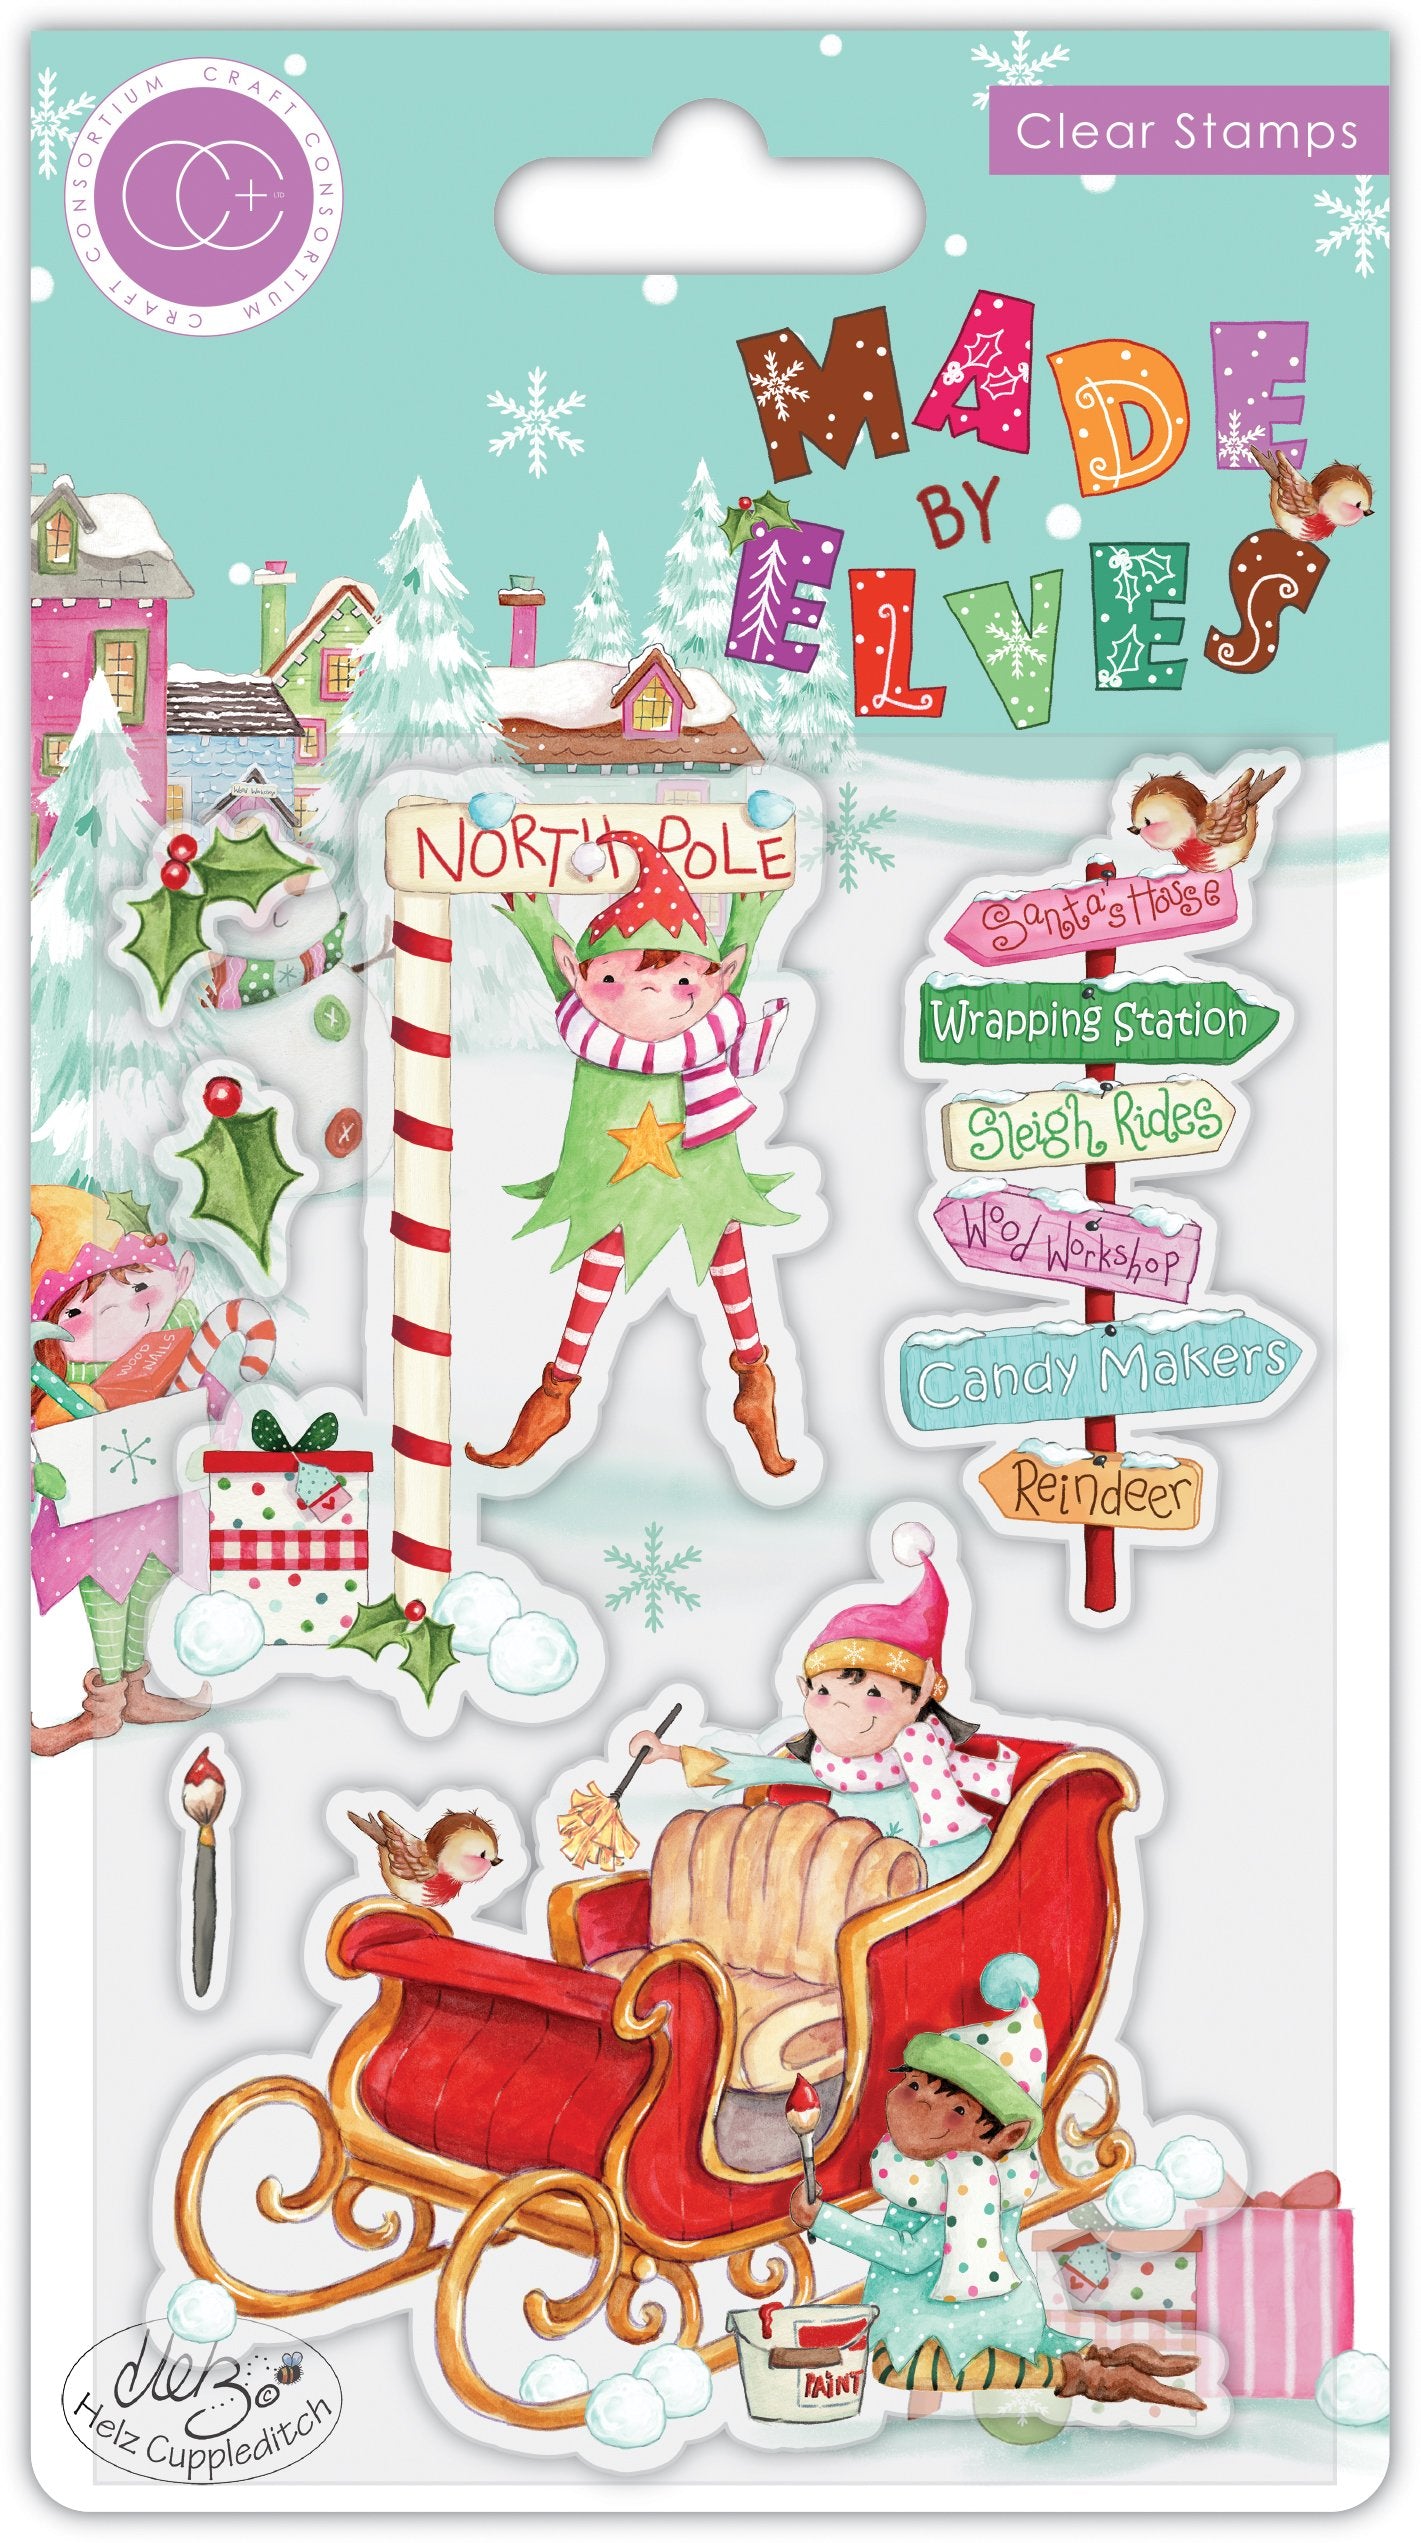 Made by Elves - Stamp Set - Sleigh